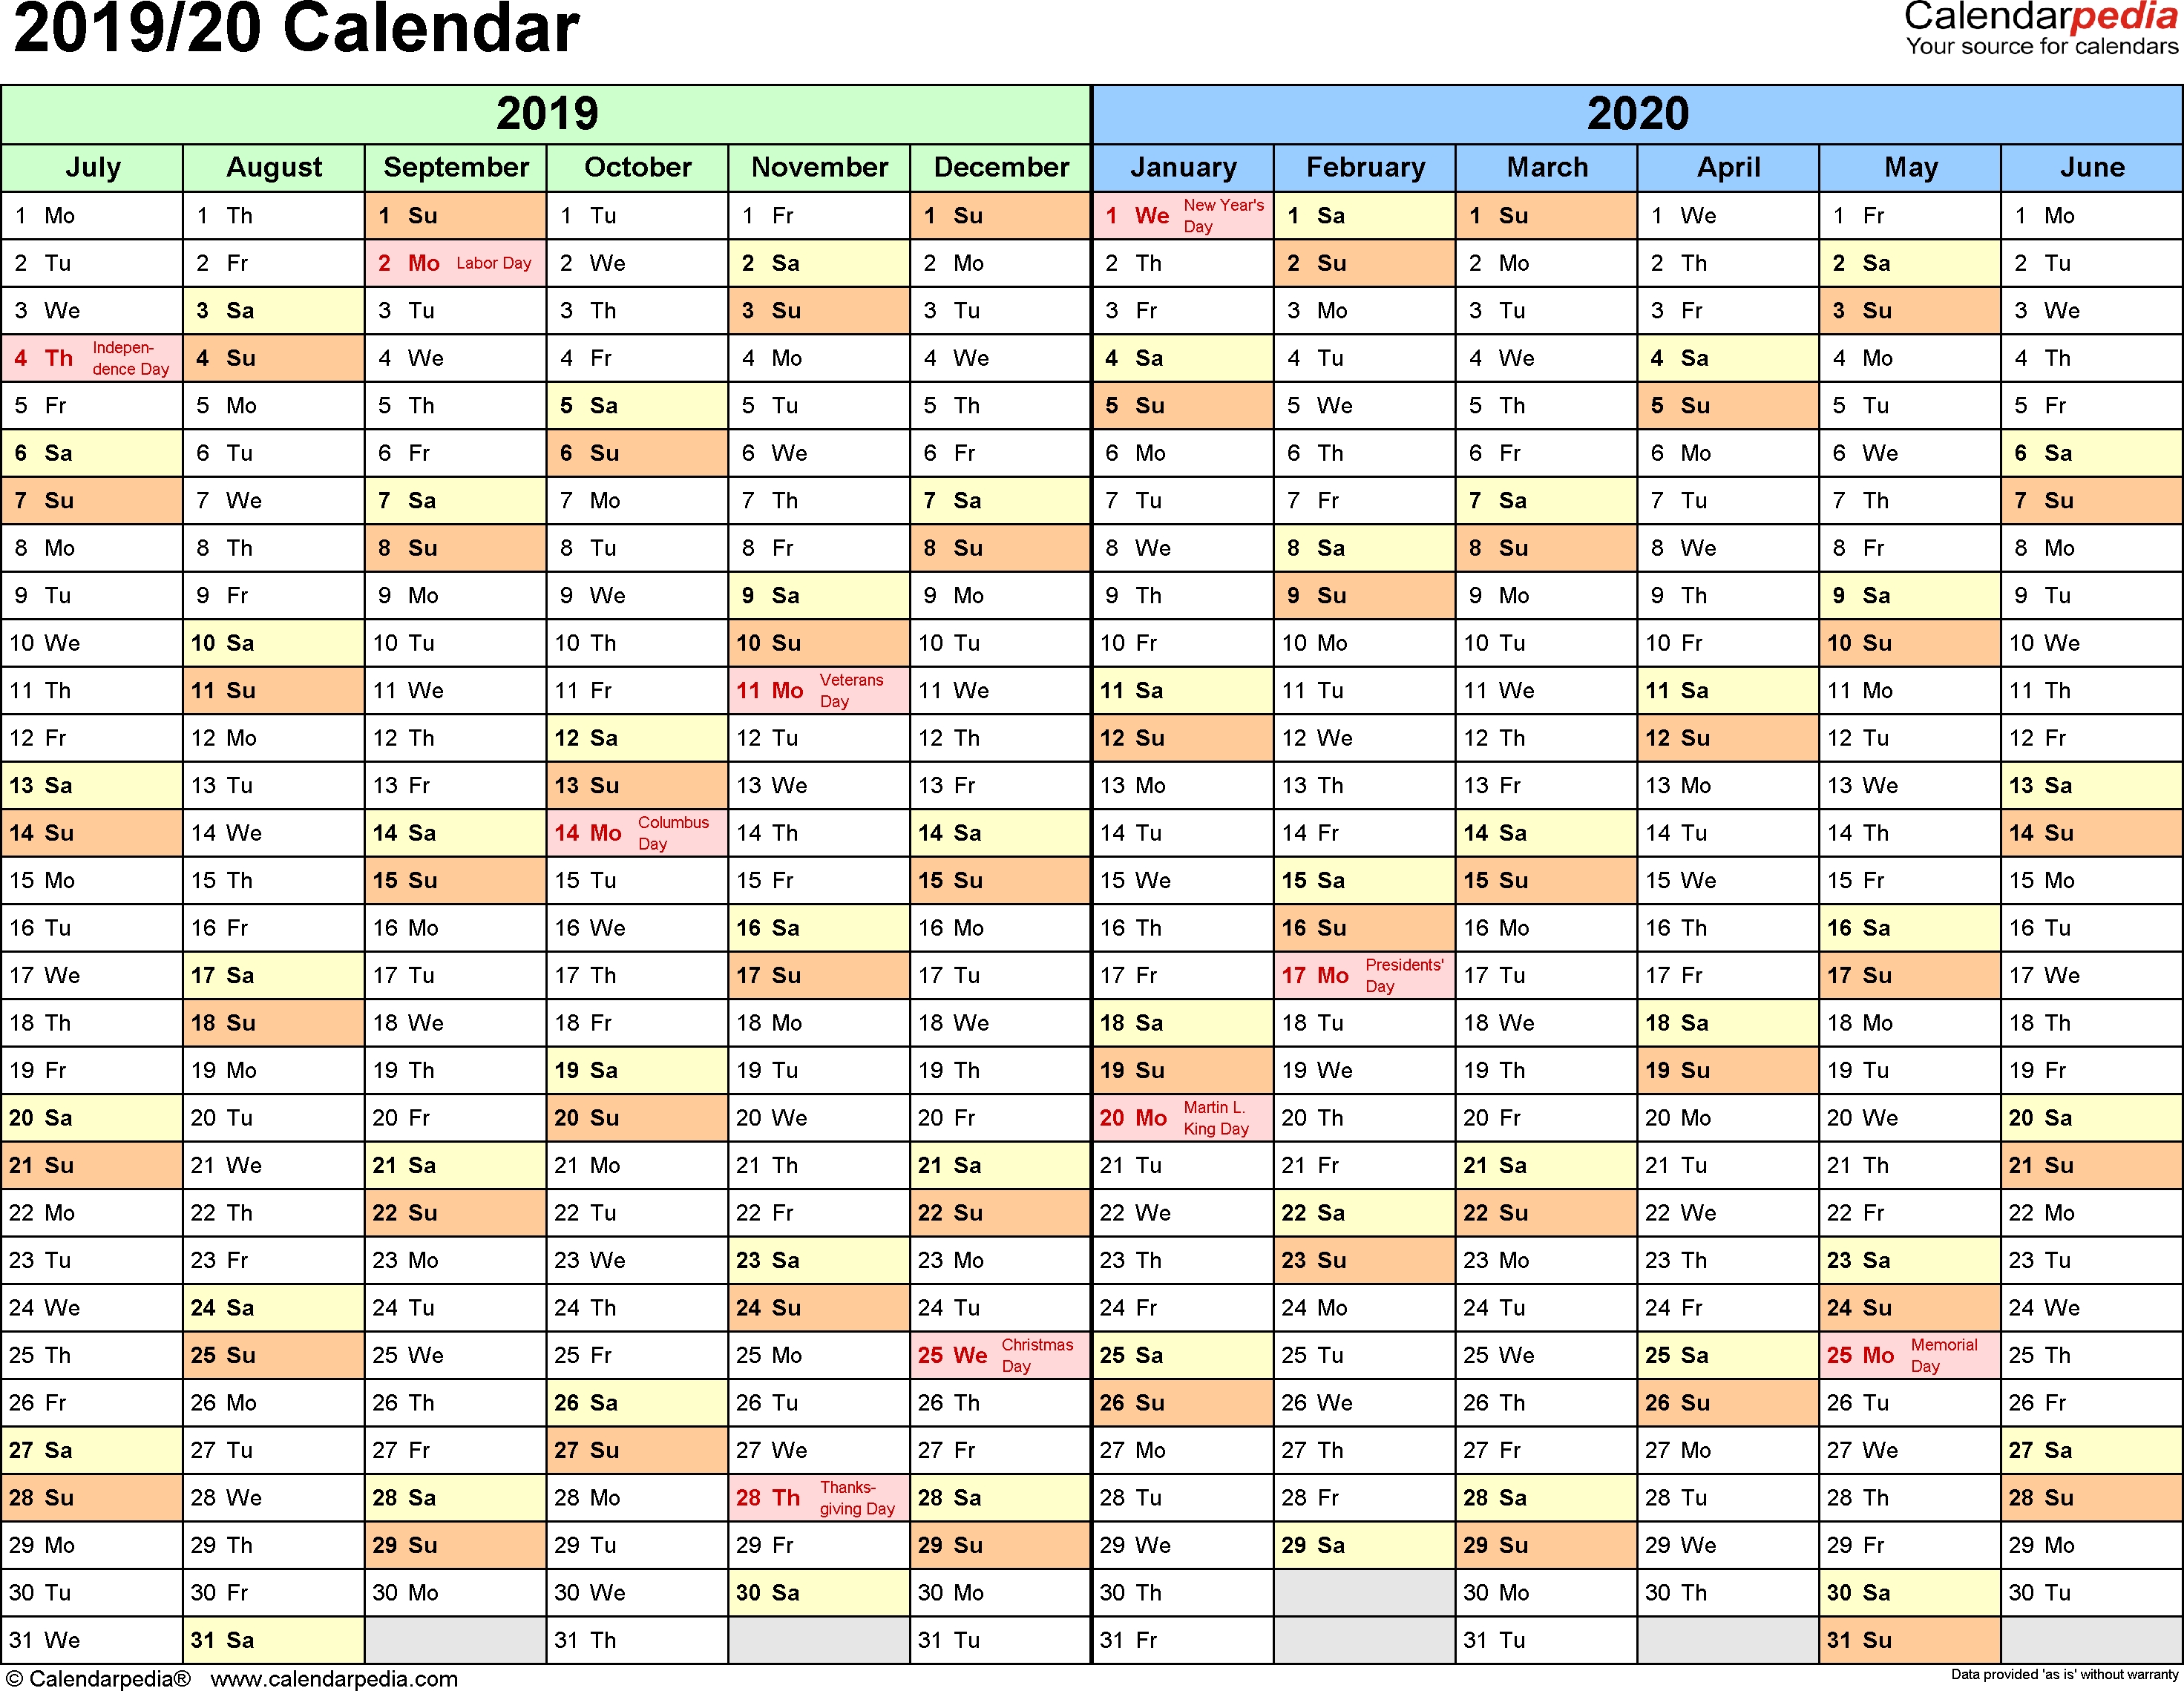 Split Year Calendar 2019/20 (July To June) - Word Templates with Free At A Glance Editable Calendar July 2019-June 2020